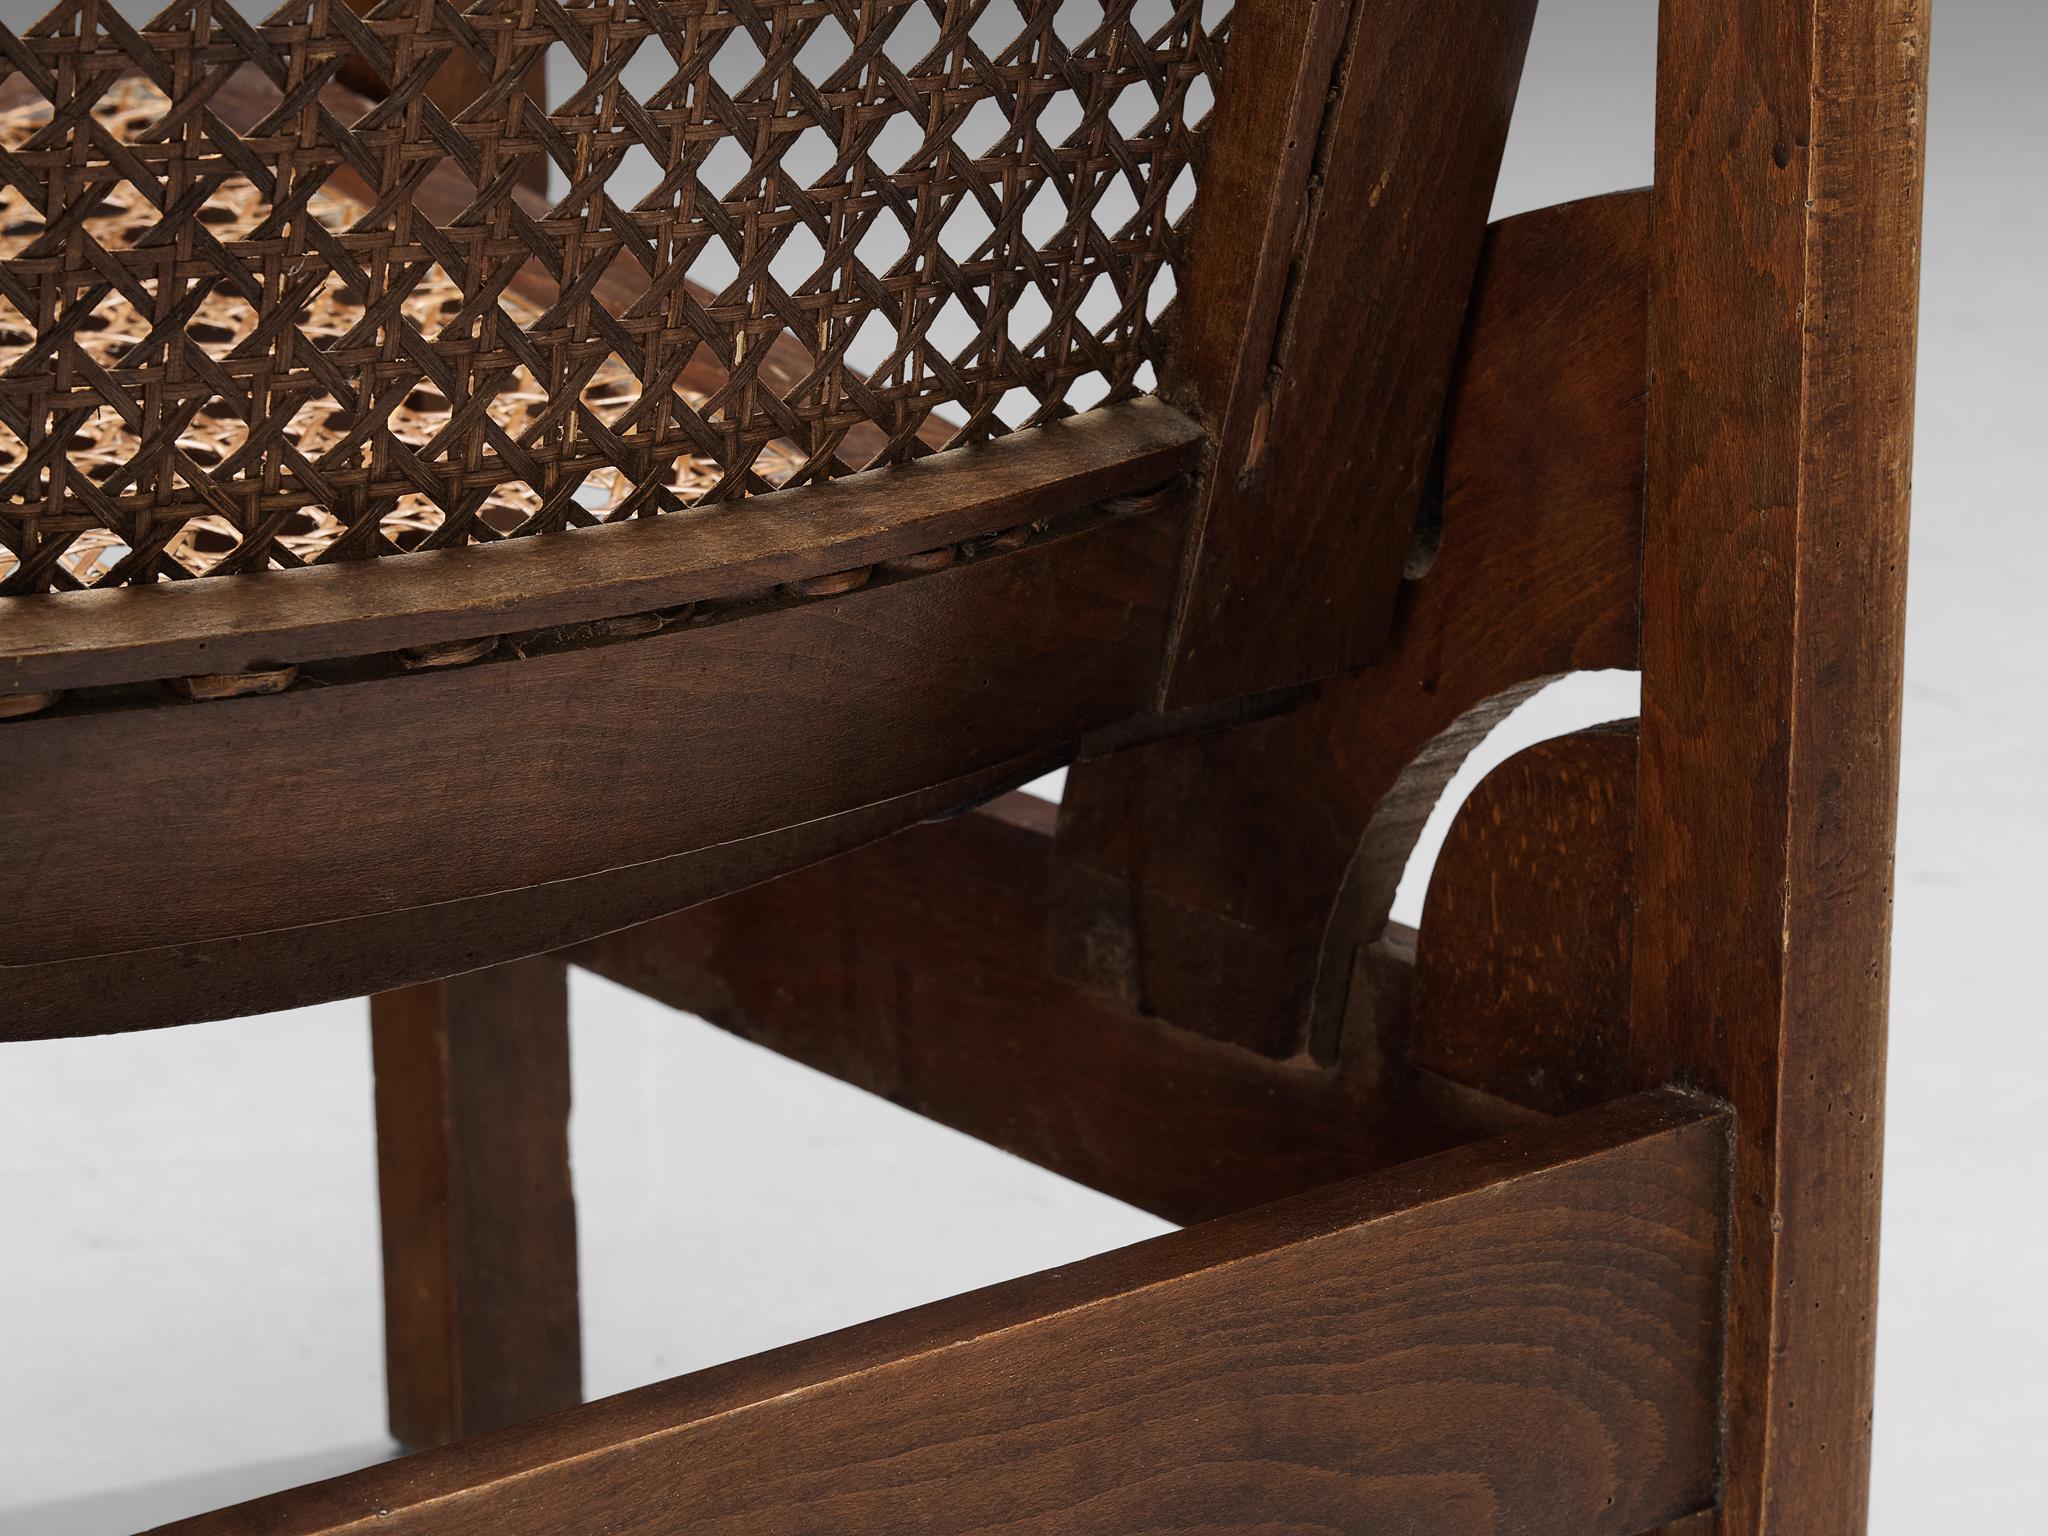 Pierre Dariel 'Hendaye' Armchair in Dark Stained Wood and Cane 2